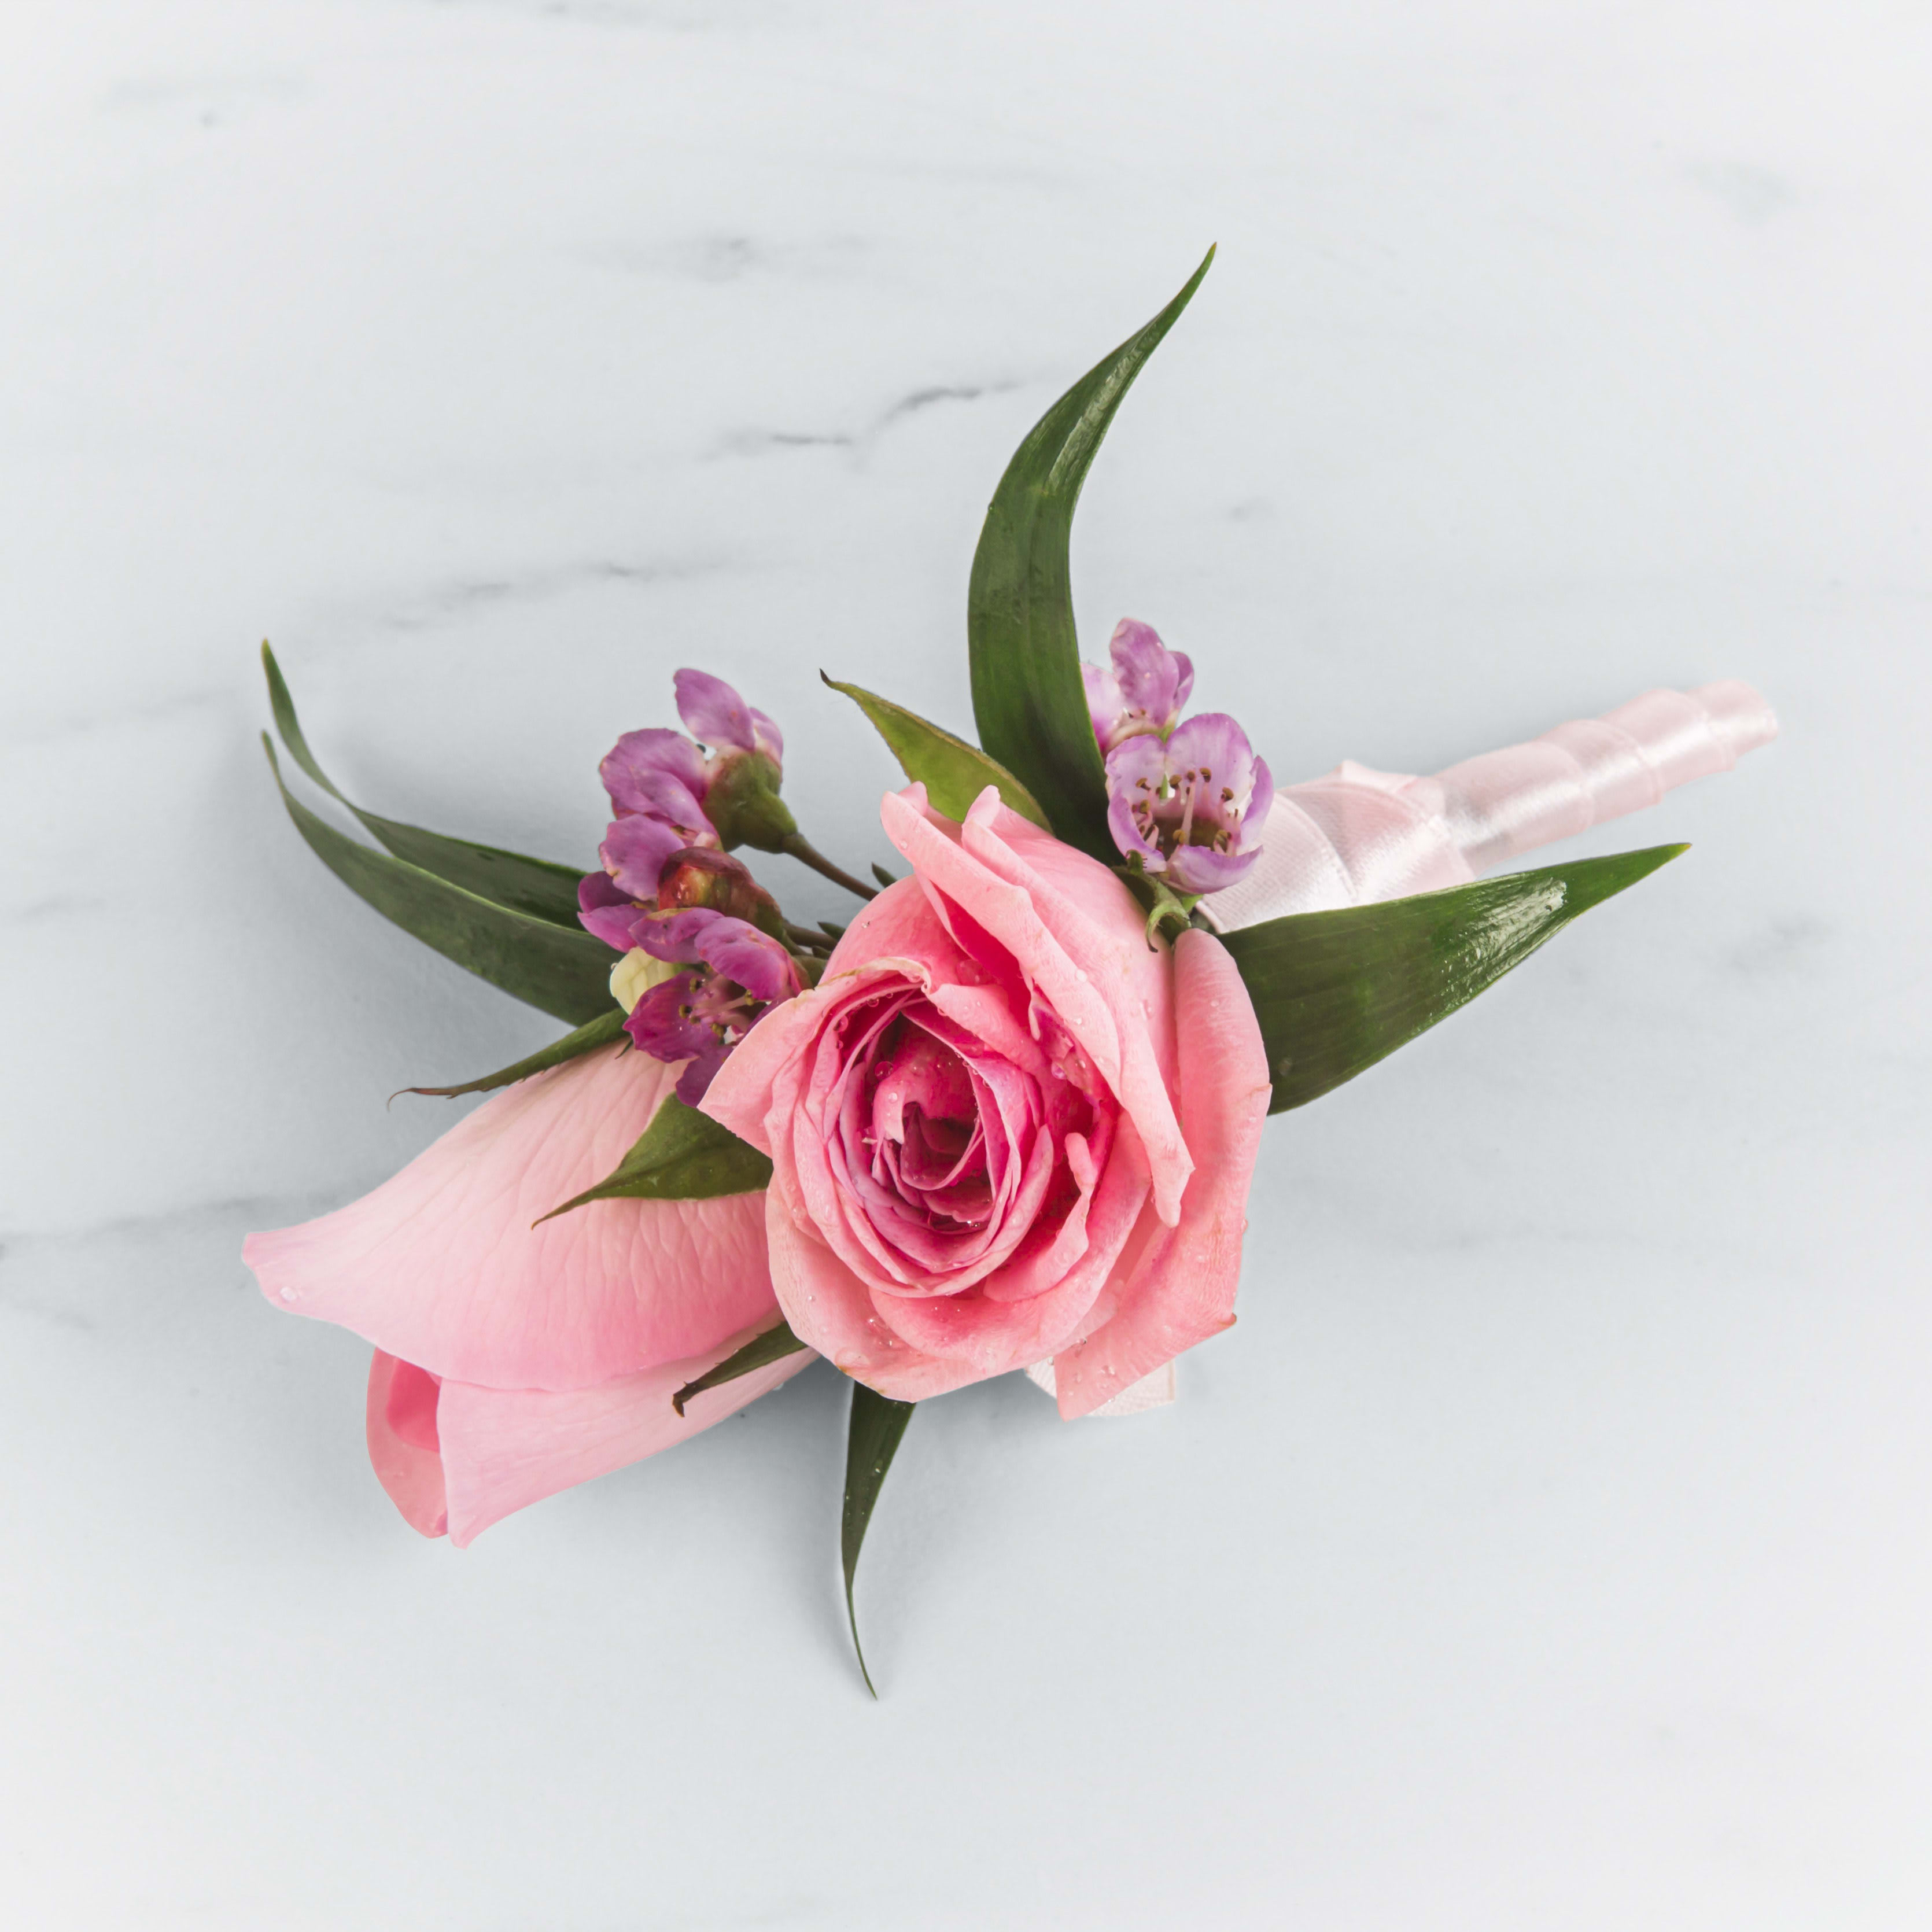 Pink Rose Boutonnière by BloomNation™  - A classic pink rose boutonnière that compliments any suit. A perfect addition to any prom, formal, or wedding event. 